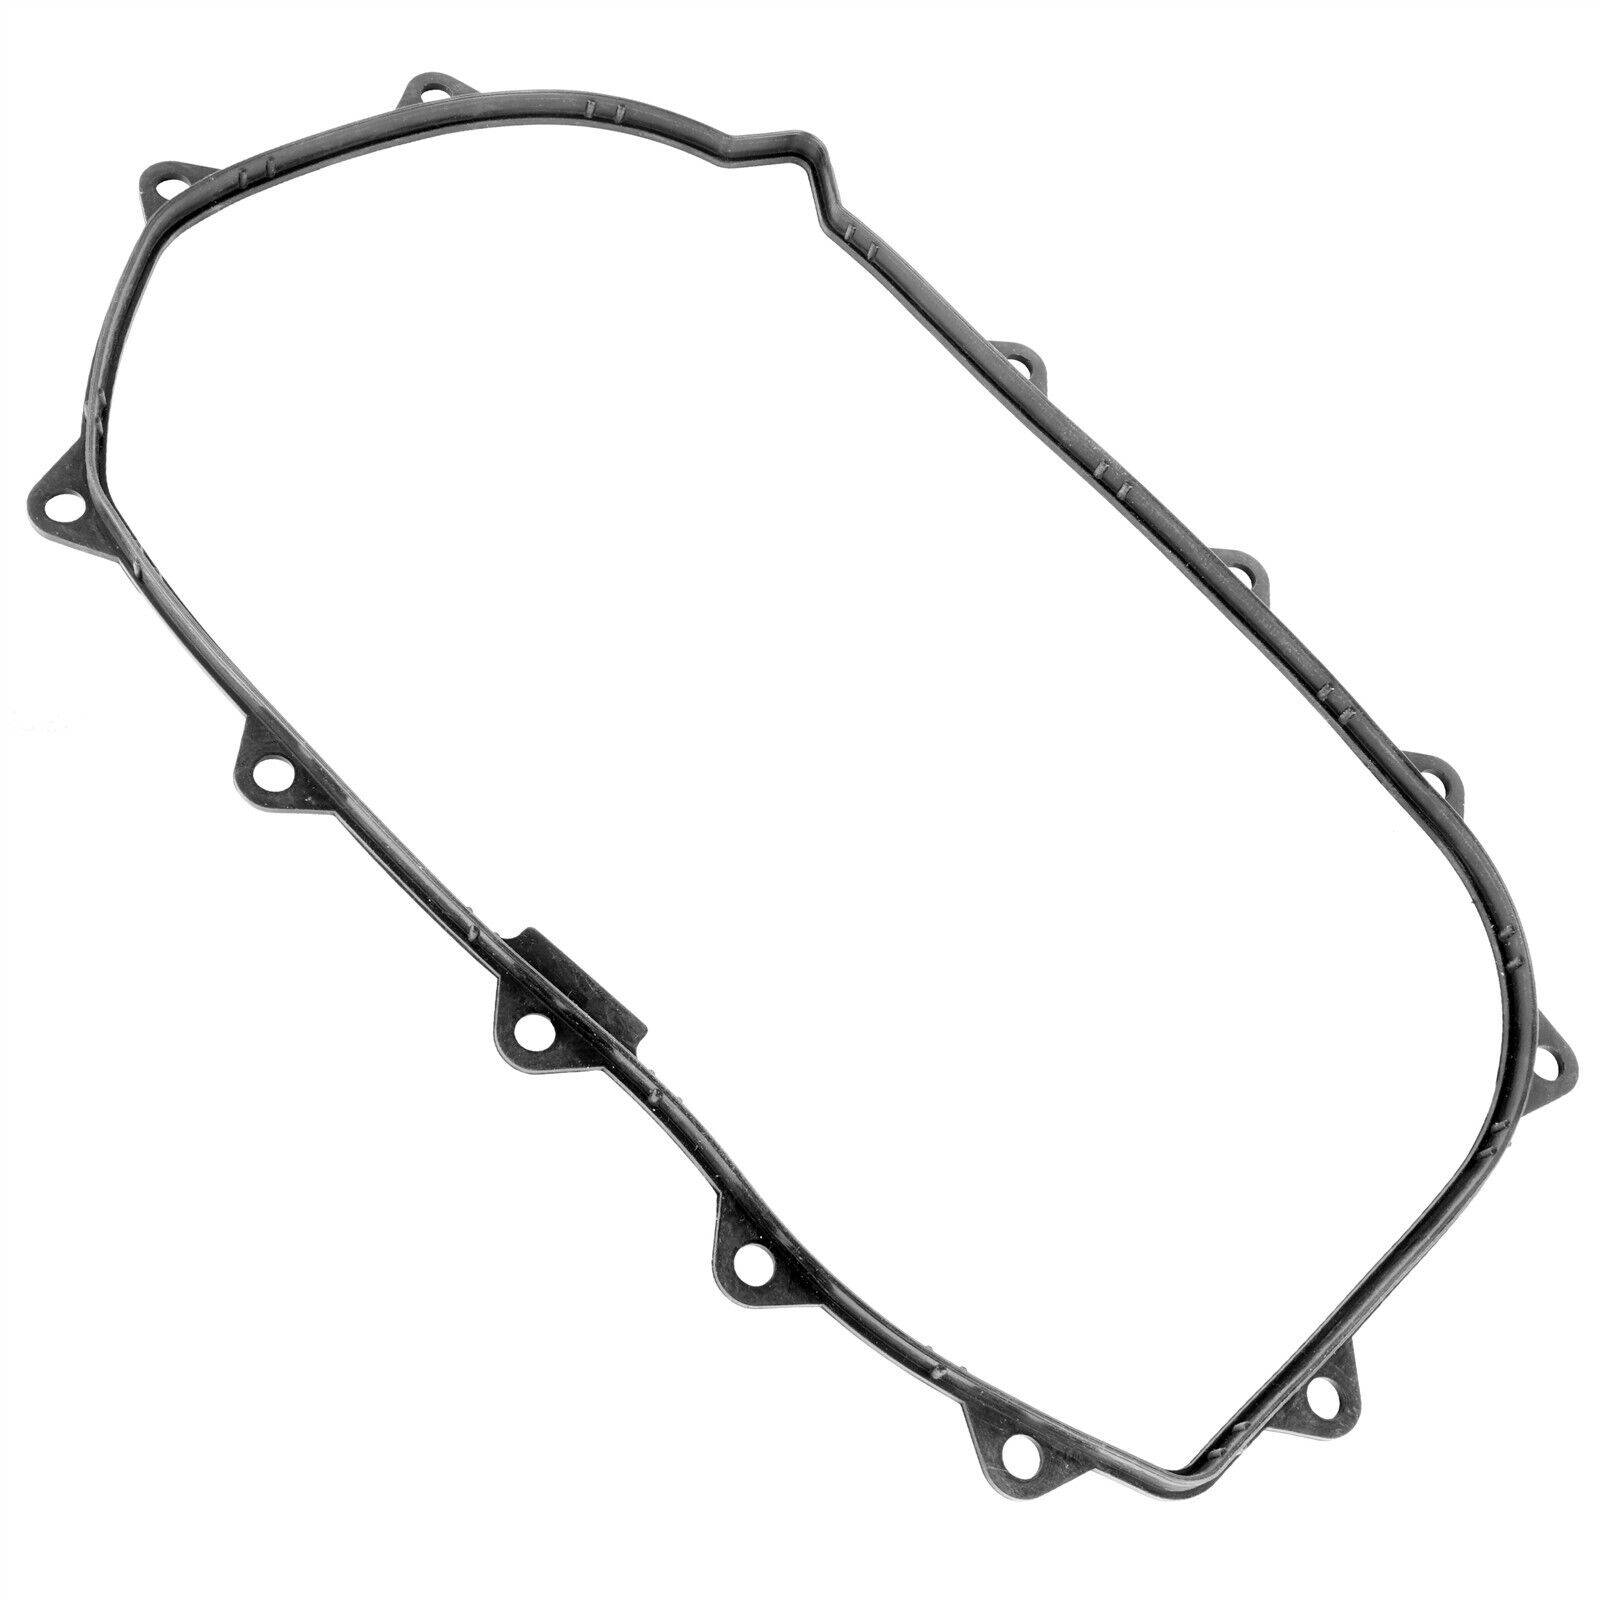 CVT Clutch Cover Gasket Fits Can-Am Outlander 800 800R/ MAX 800R 4X4 2006 - 2015 - image 1 of 3